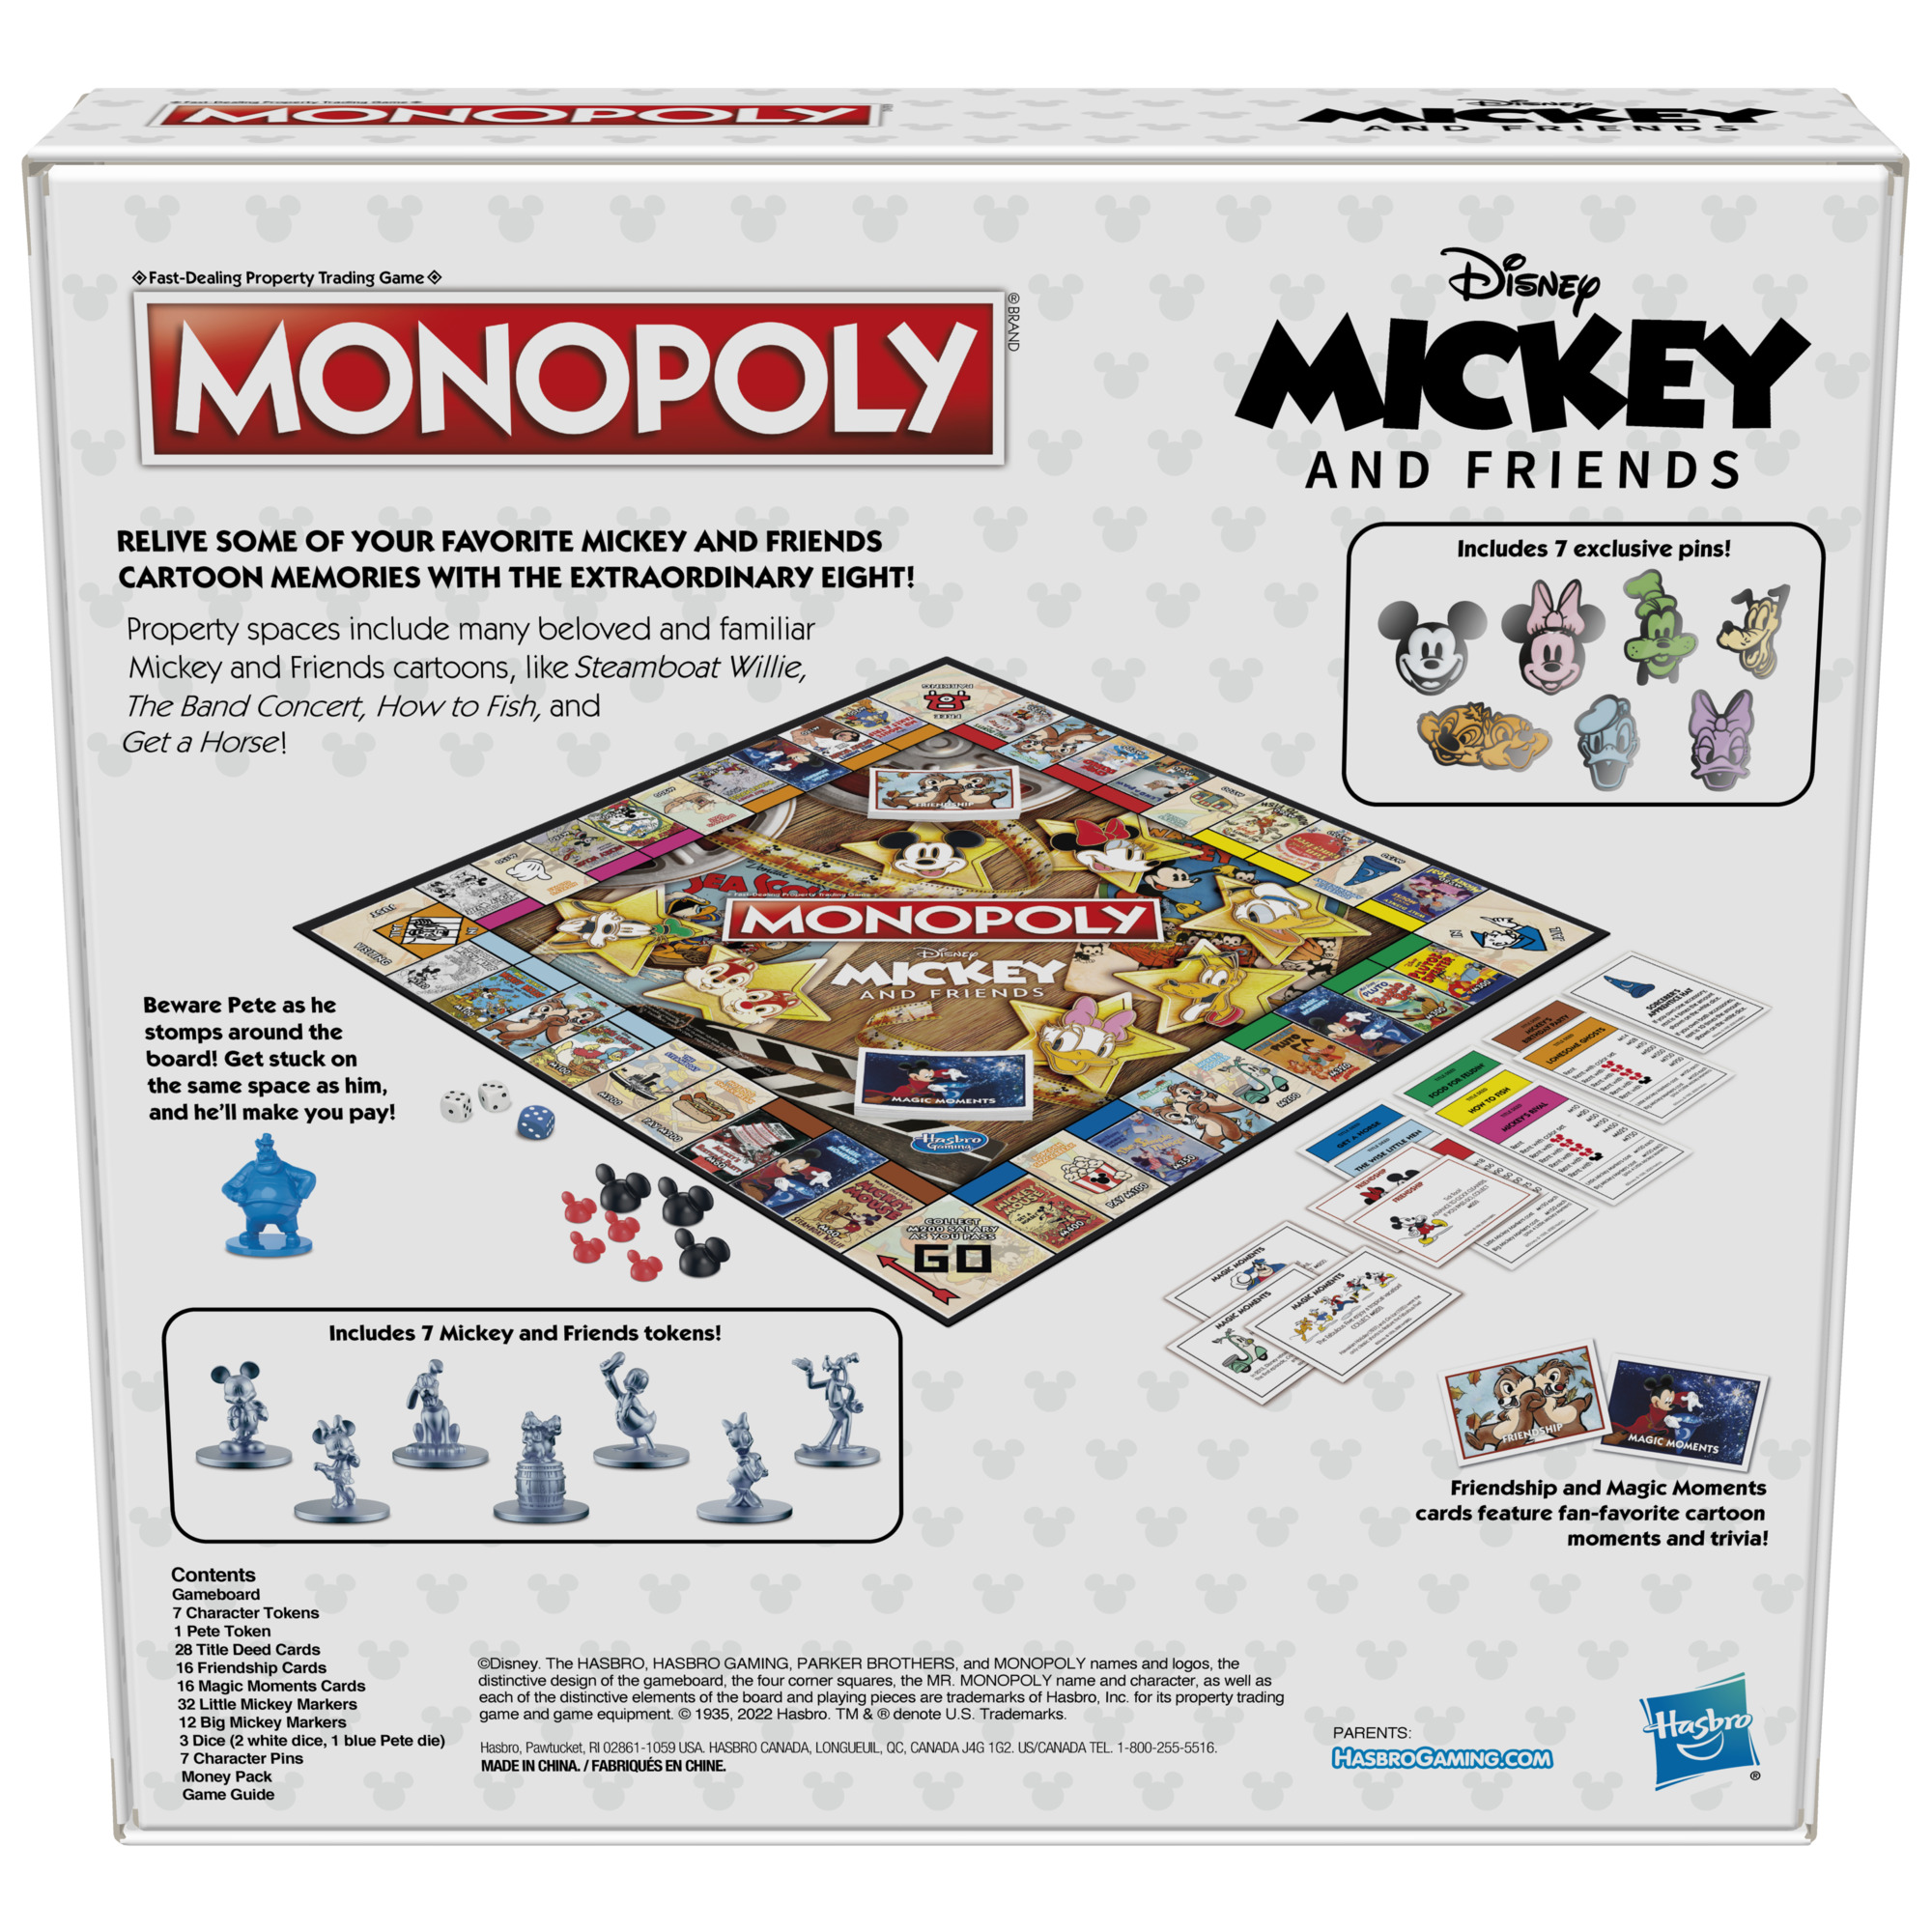 Monopoly Disney Mickey and Friends Edition Board Game for kids and Family Ages 8 and Up - image 4 of 7